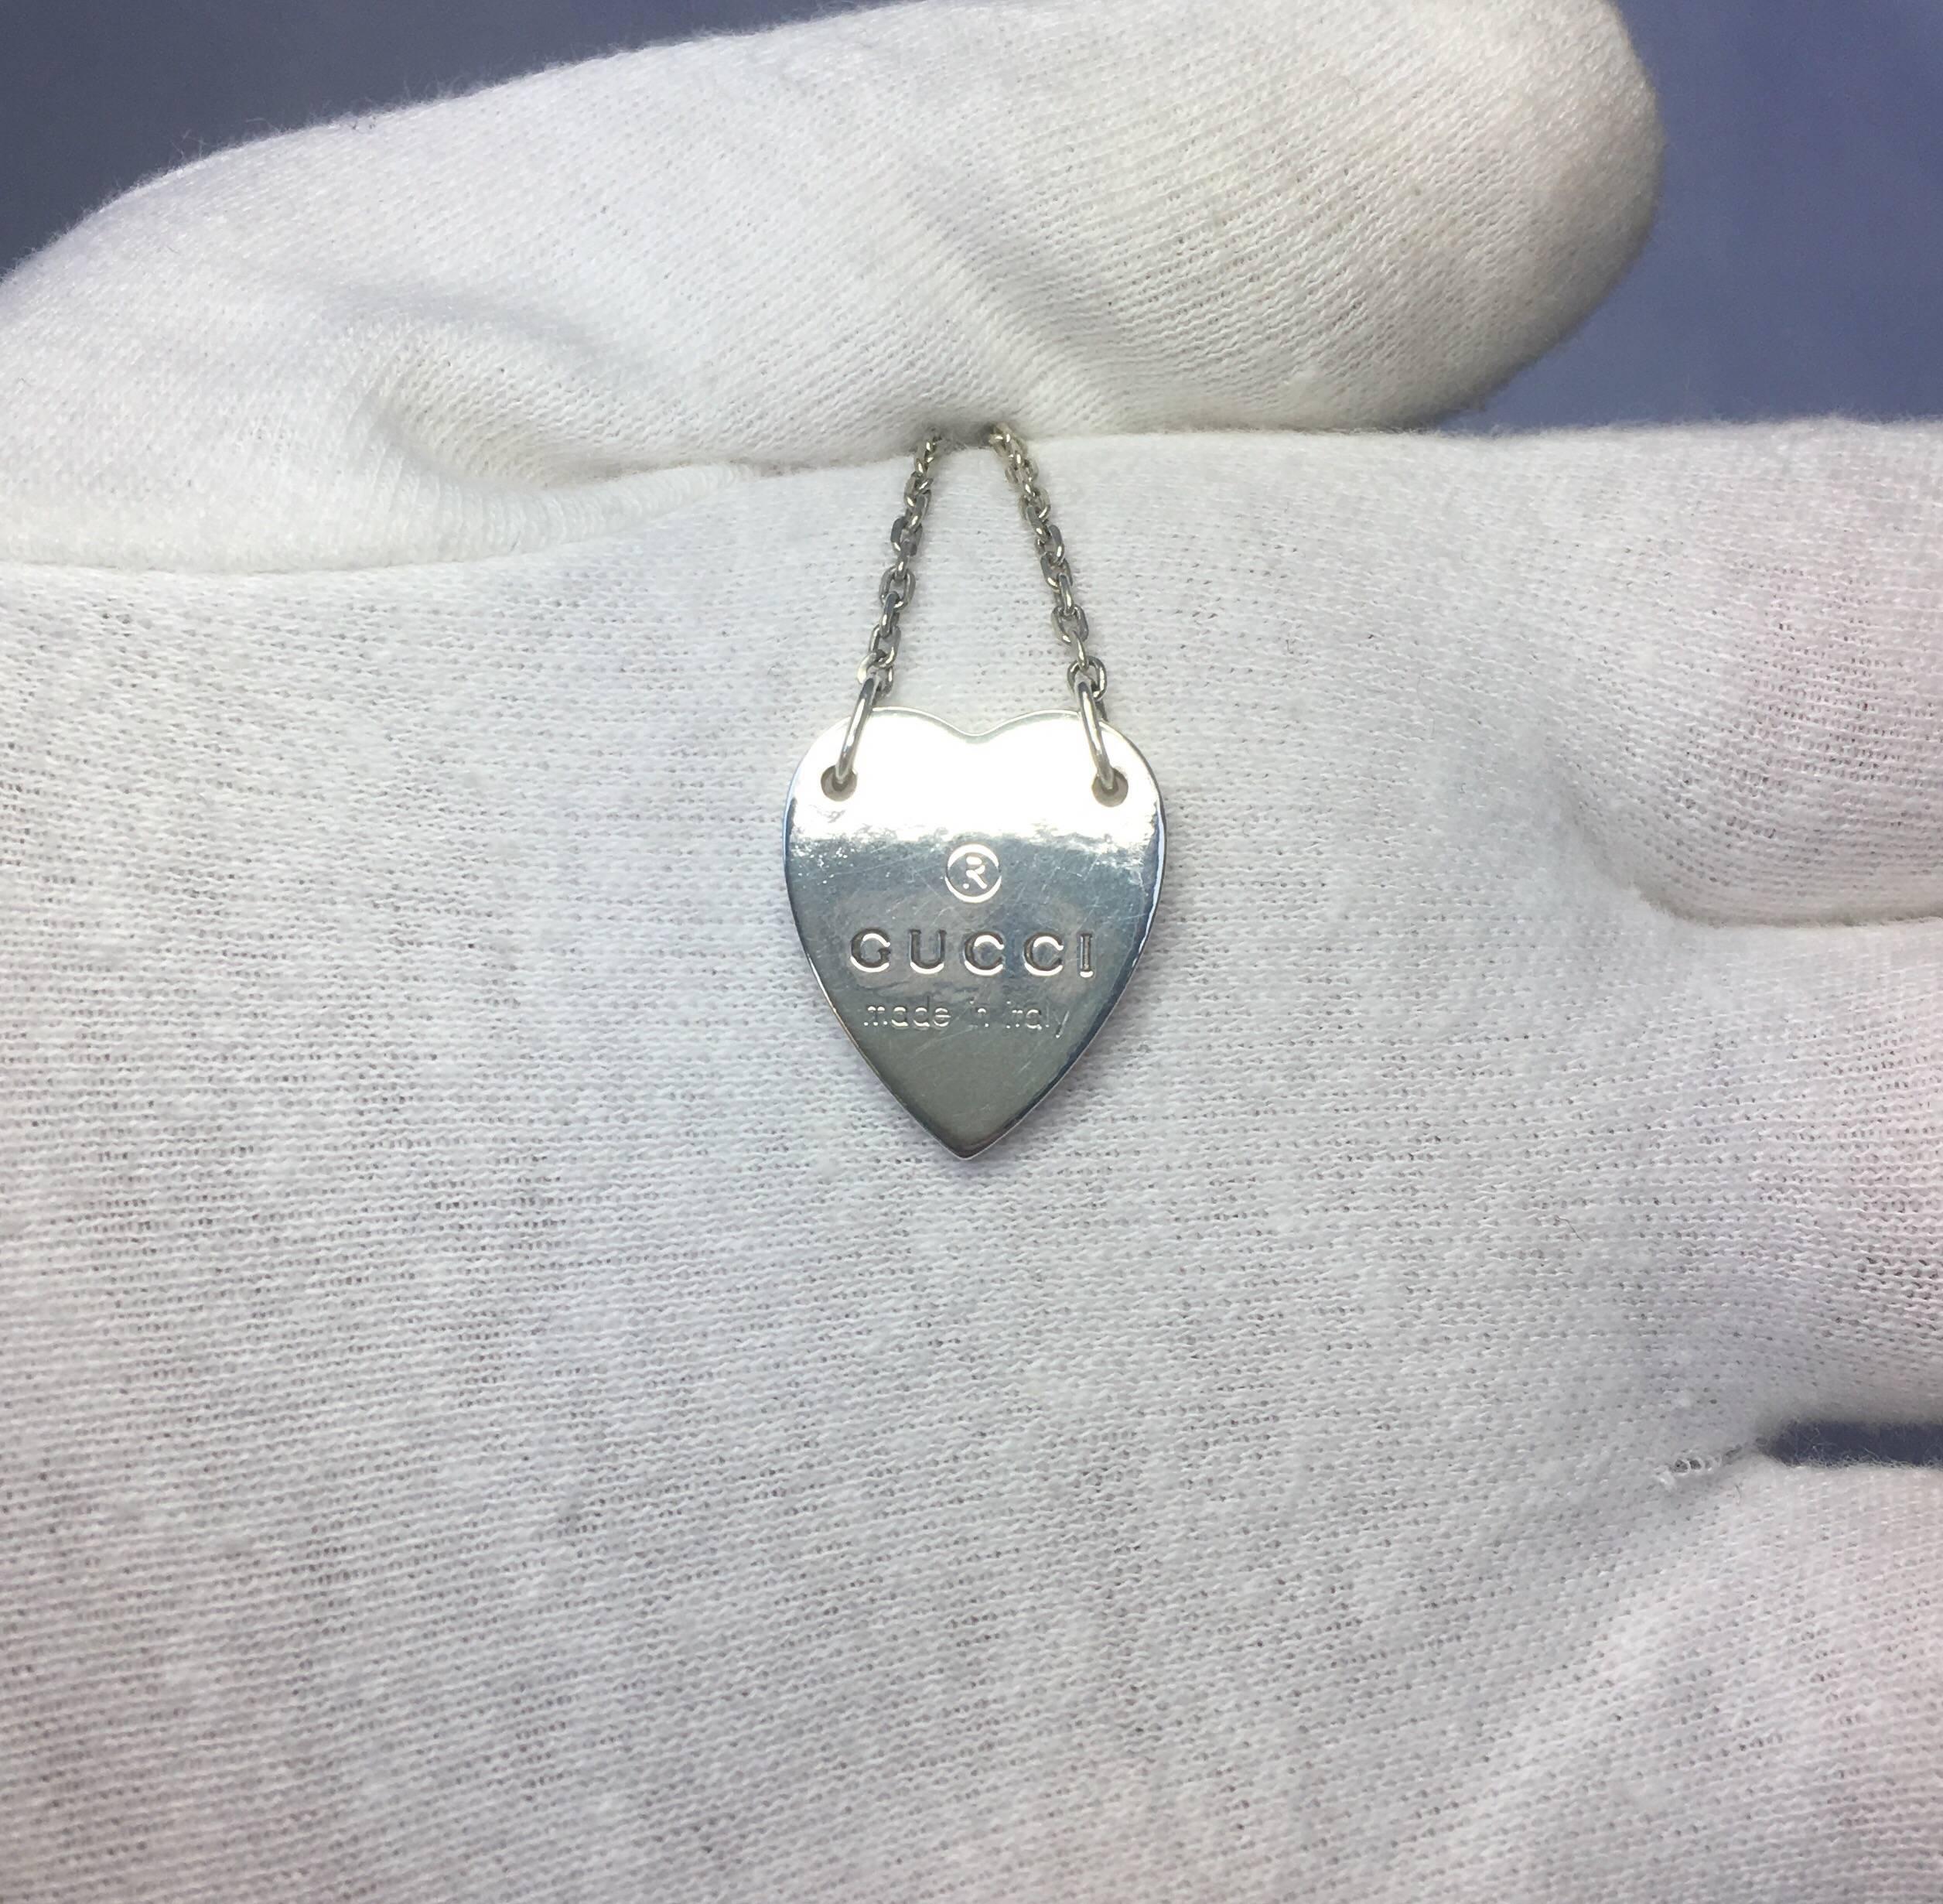 Gucci Sterling Silver Necklace Heart Pendant 1